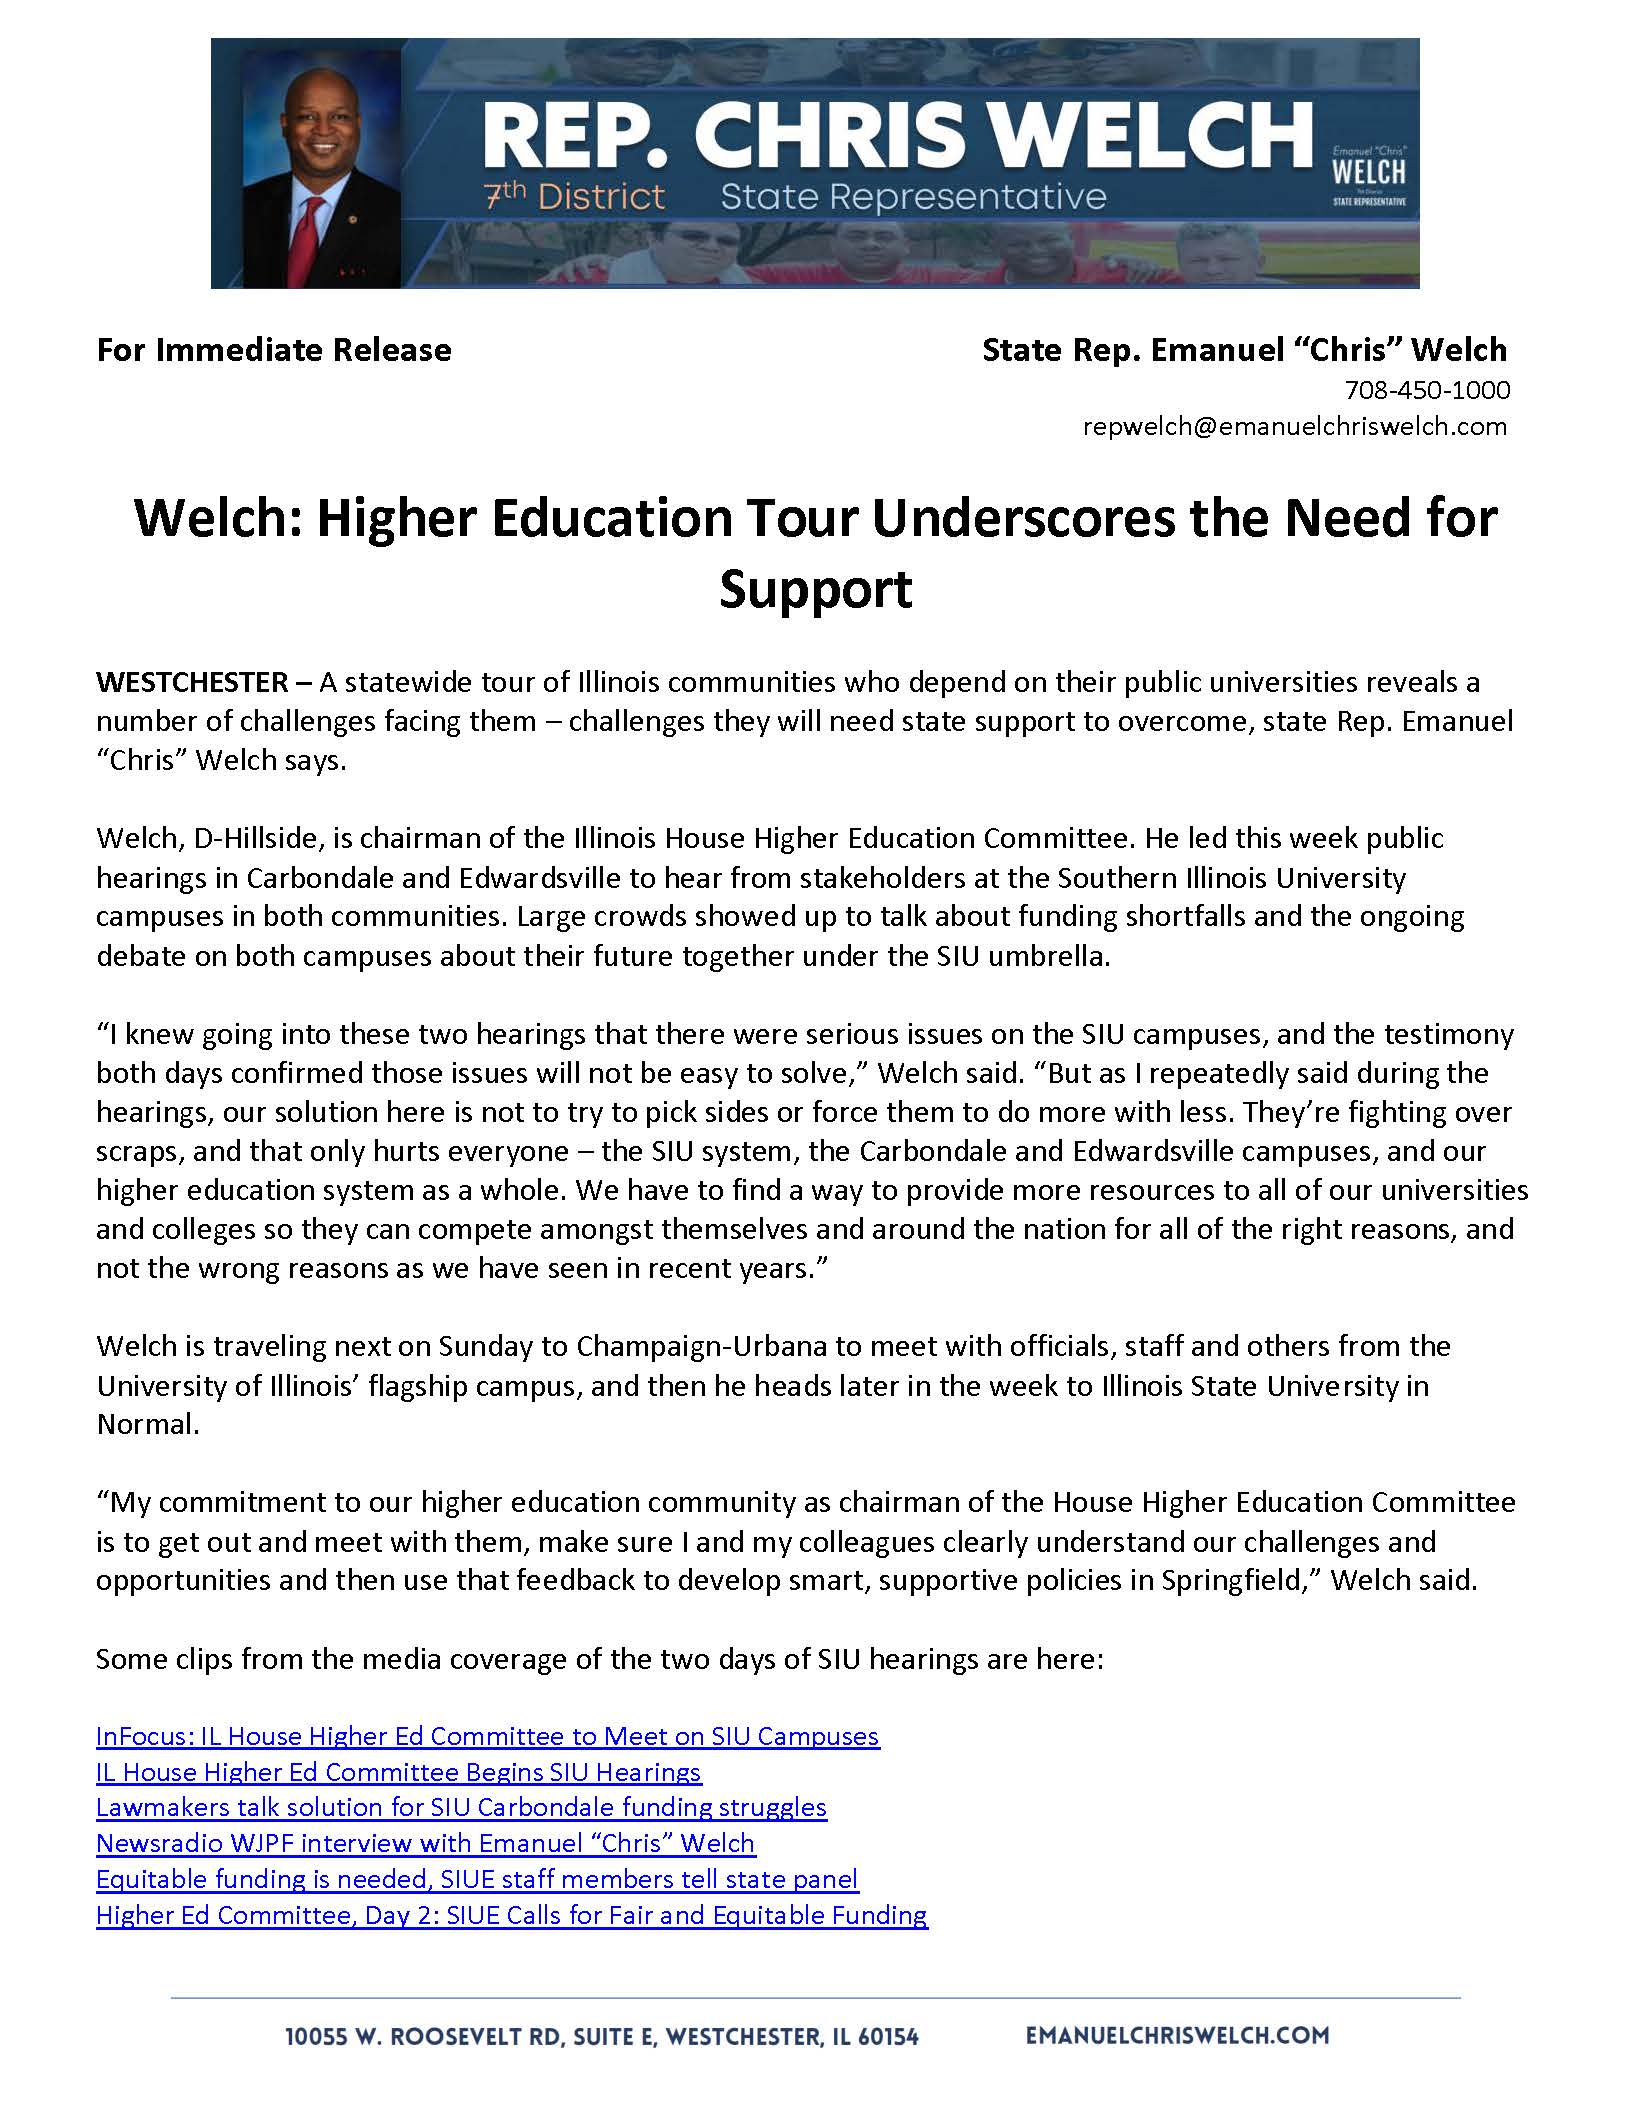 Welch: Higher Education Tour Underscores the Need for Support (Copy)